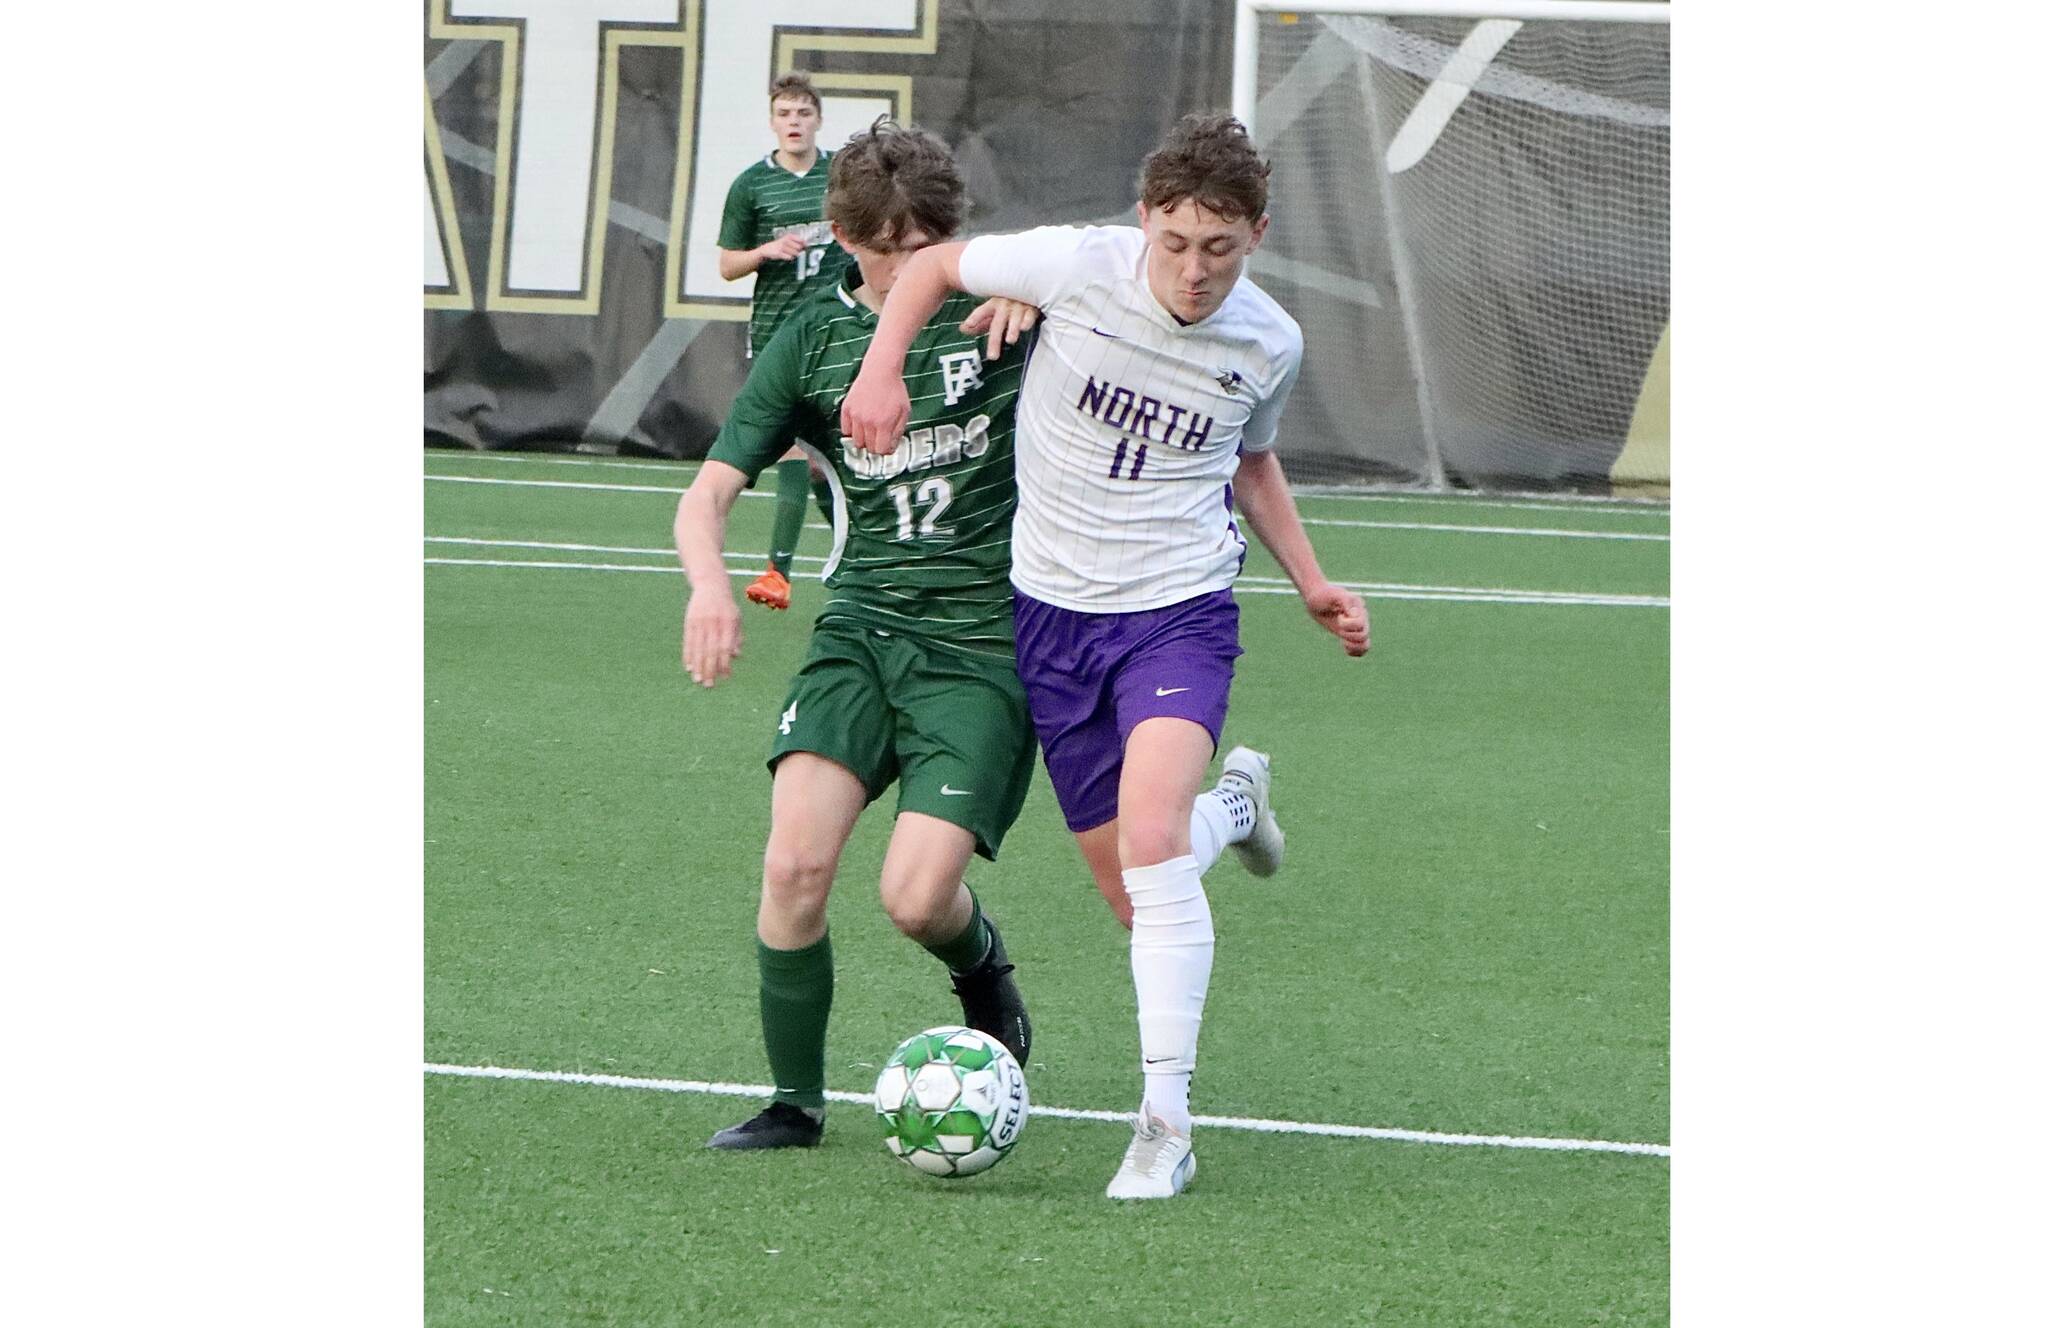 BOYS SOCCER: Port Angeles loses to first-place North Kitsap